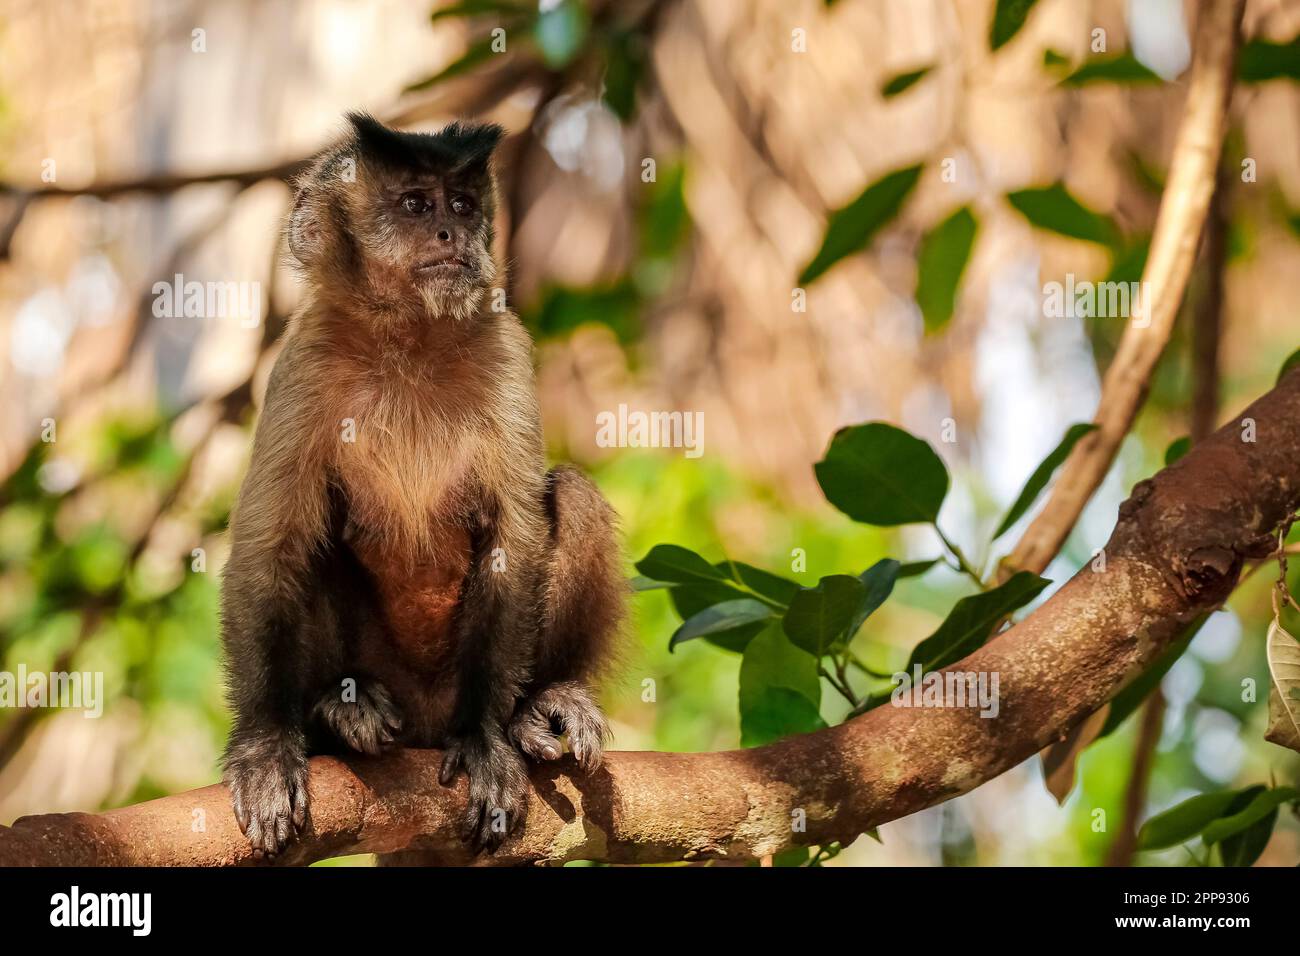 Hooded Capuchin sitting upright, on a branch against defocused leaves, looking sideways, partly in the sun, Lagoa das Araras, Bom Jardim, Mato Grosso, Stock Photo